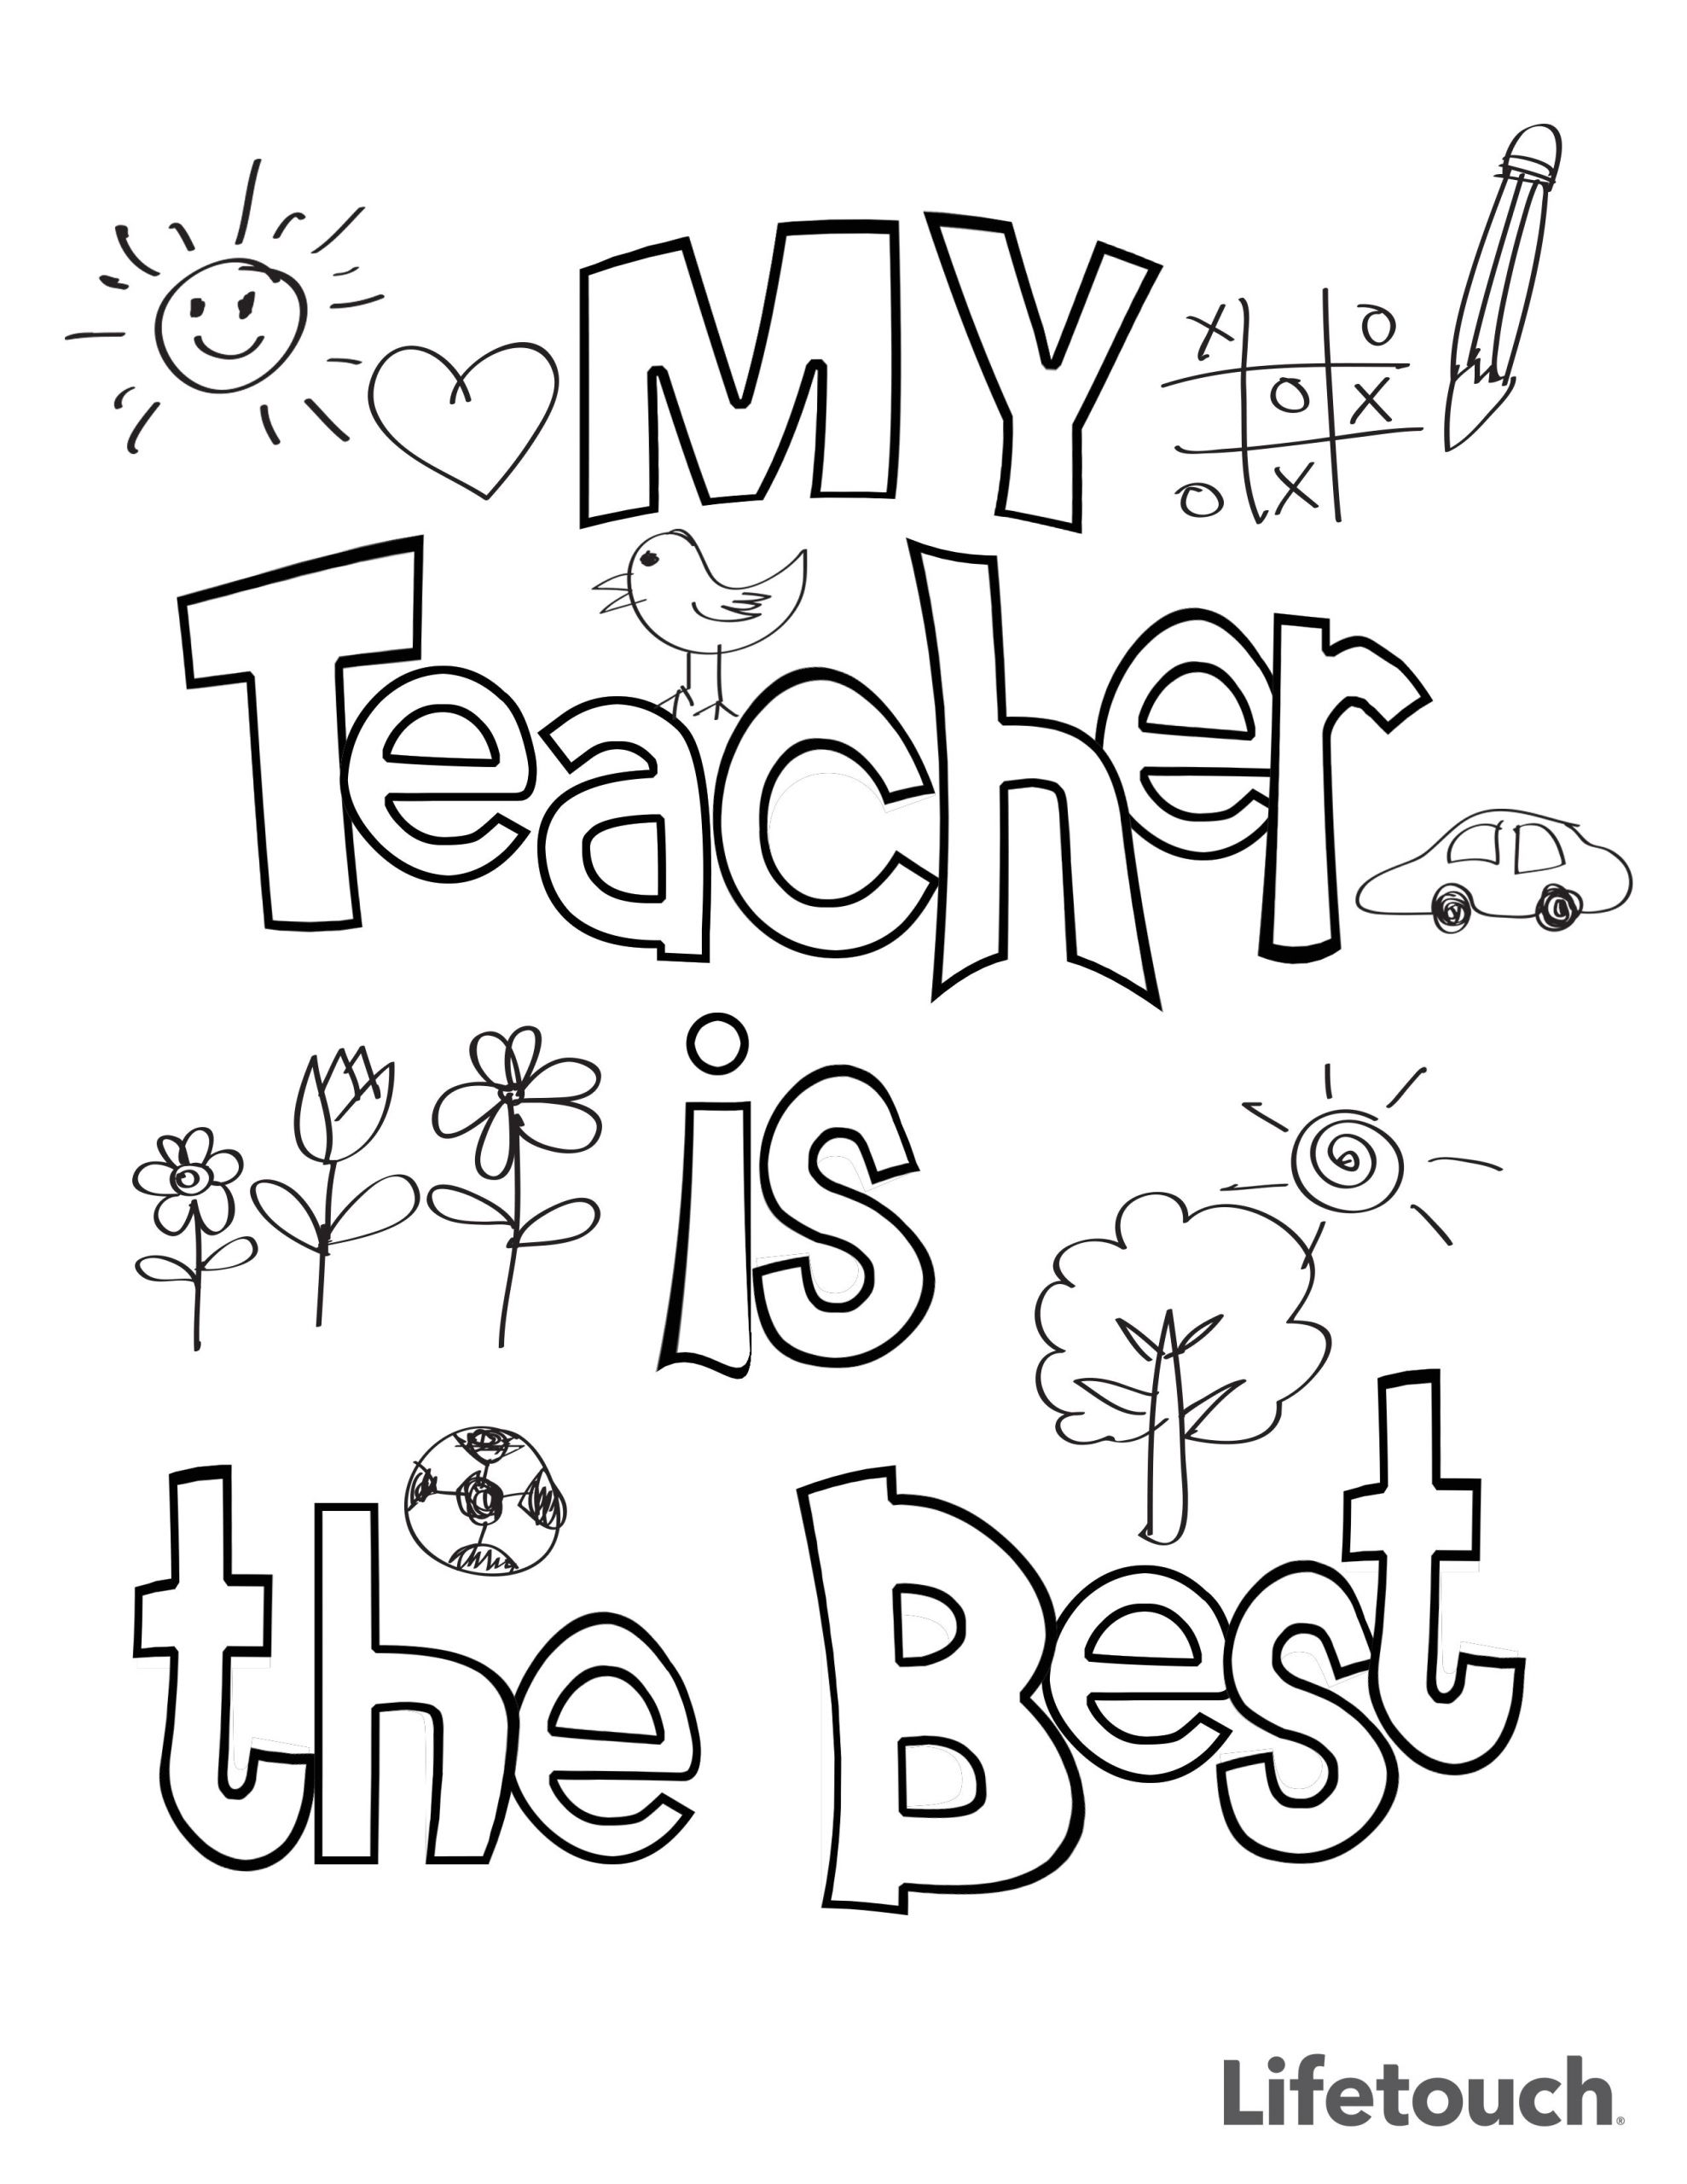 Printable Teachers Day Coloring Pages - Printable World Holiday